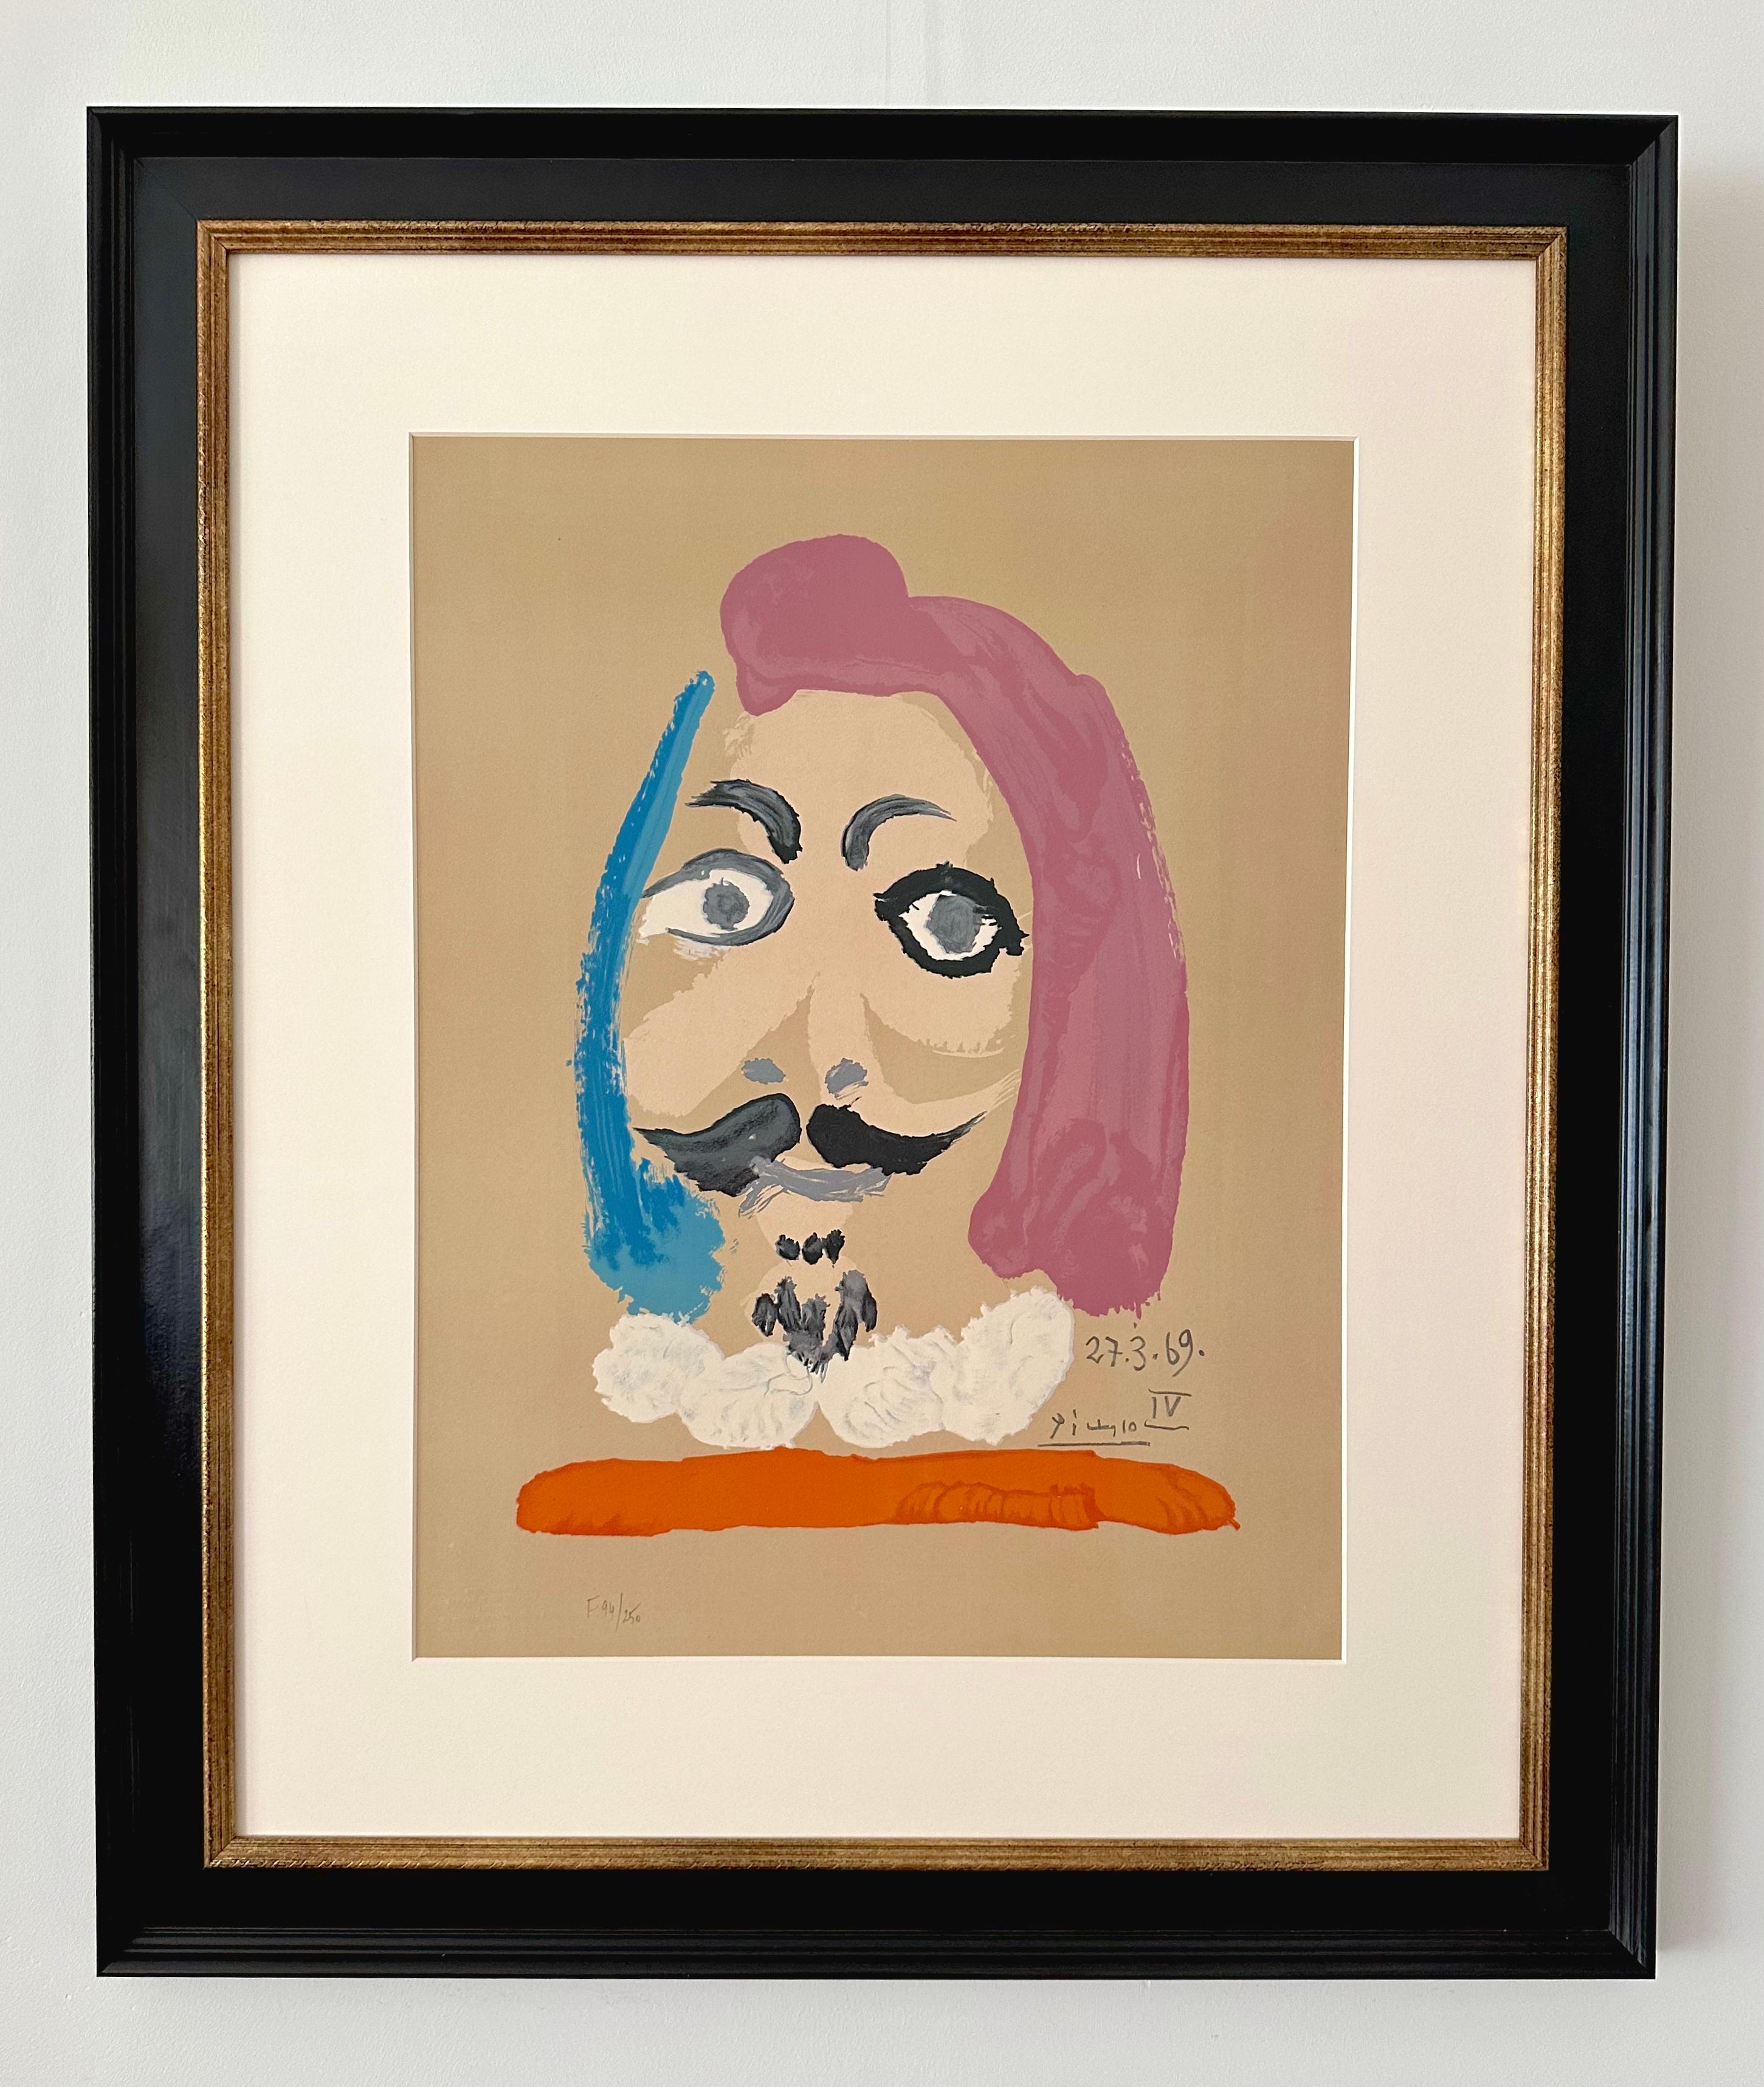 Pablo Picasso – Portraits Imaginaires 27.3.69 IV
Color lithograph from the serie ‘Portraits Imaginaires’ op Arches wove paper (With Arches watermark).
Published by Georges Salinas, 1970
Edition: 250 for France (F) and 250 for America (A)
Signed in